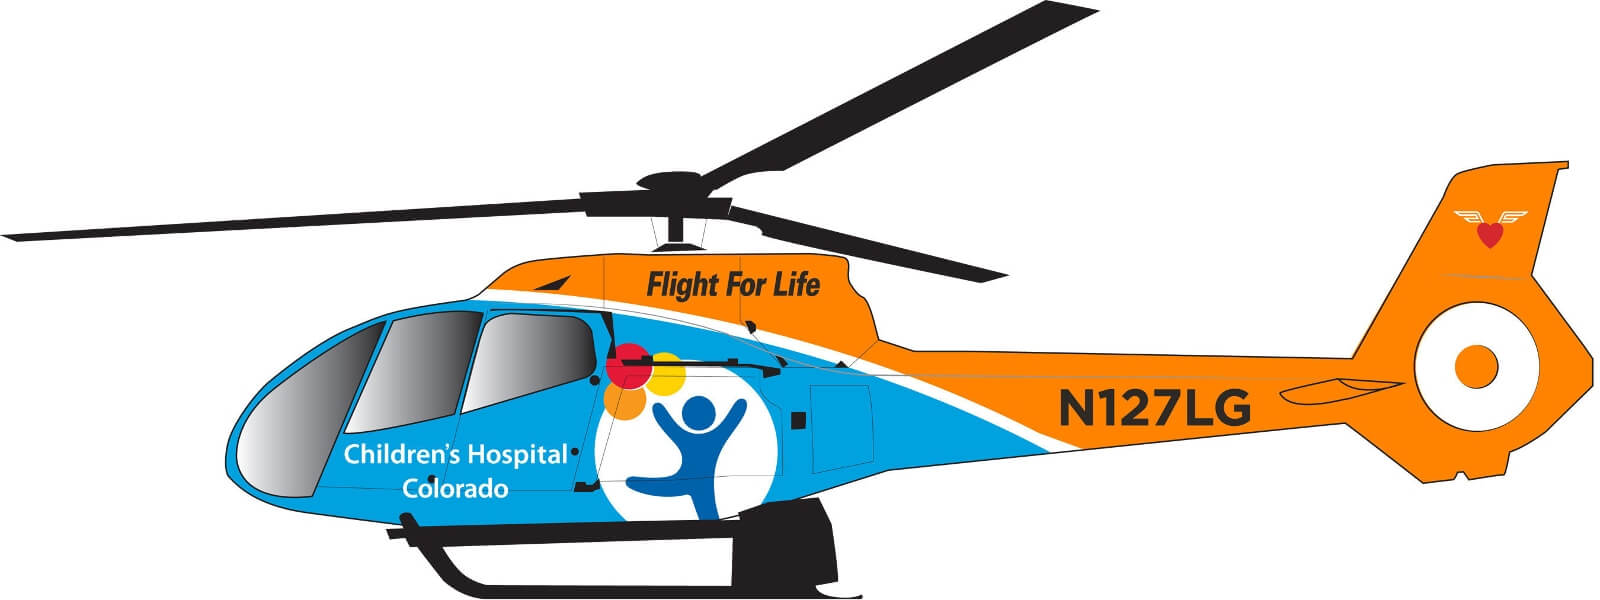 Illustration of Flight for Life Colorado helicopter.